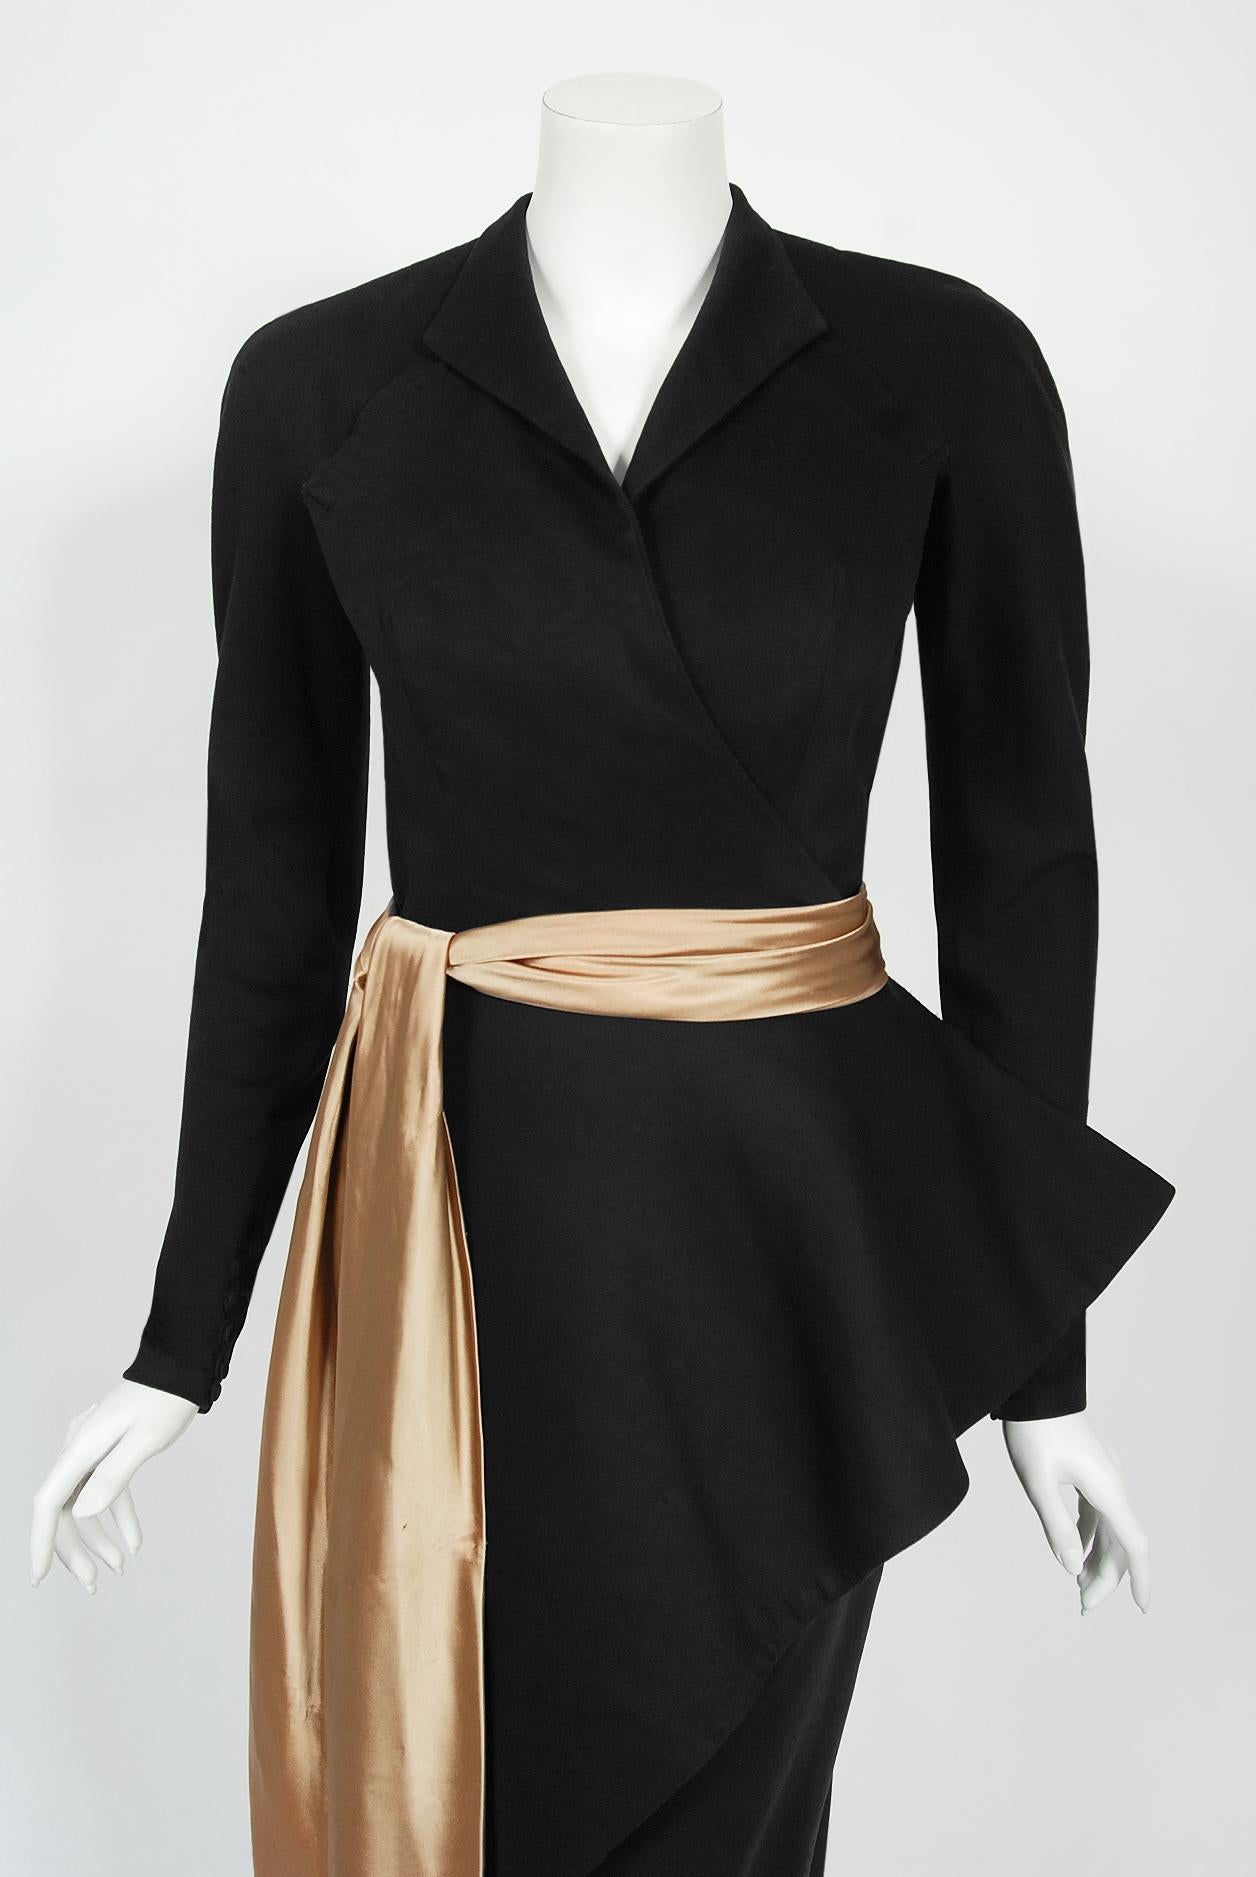 An incredibly gorgeous and well documented Jeanne Lanvin haute couture sculpted black wool cocktail dress dating back to the mid to fall-winter 1949. Lanvin was recognized for her innovative approach to fashion as well as for her fine craftsmanship.